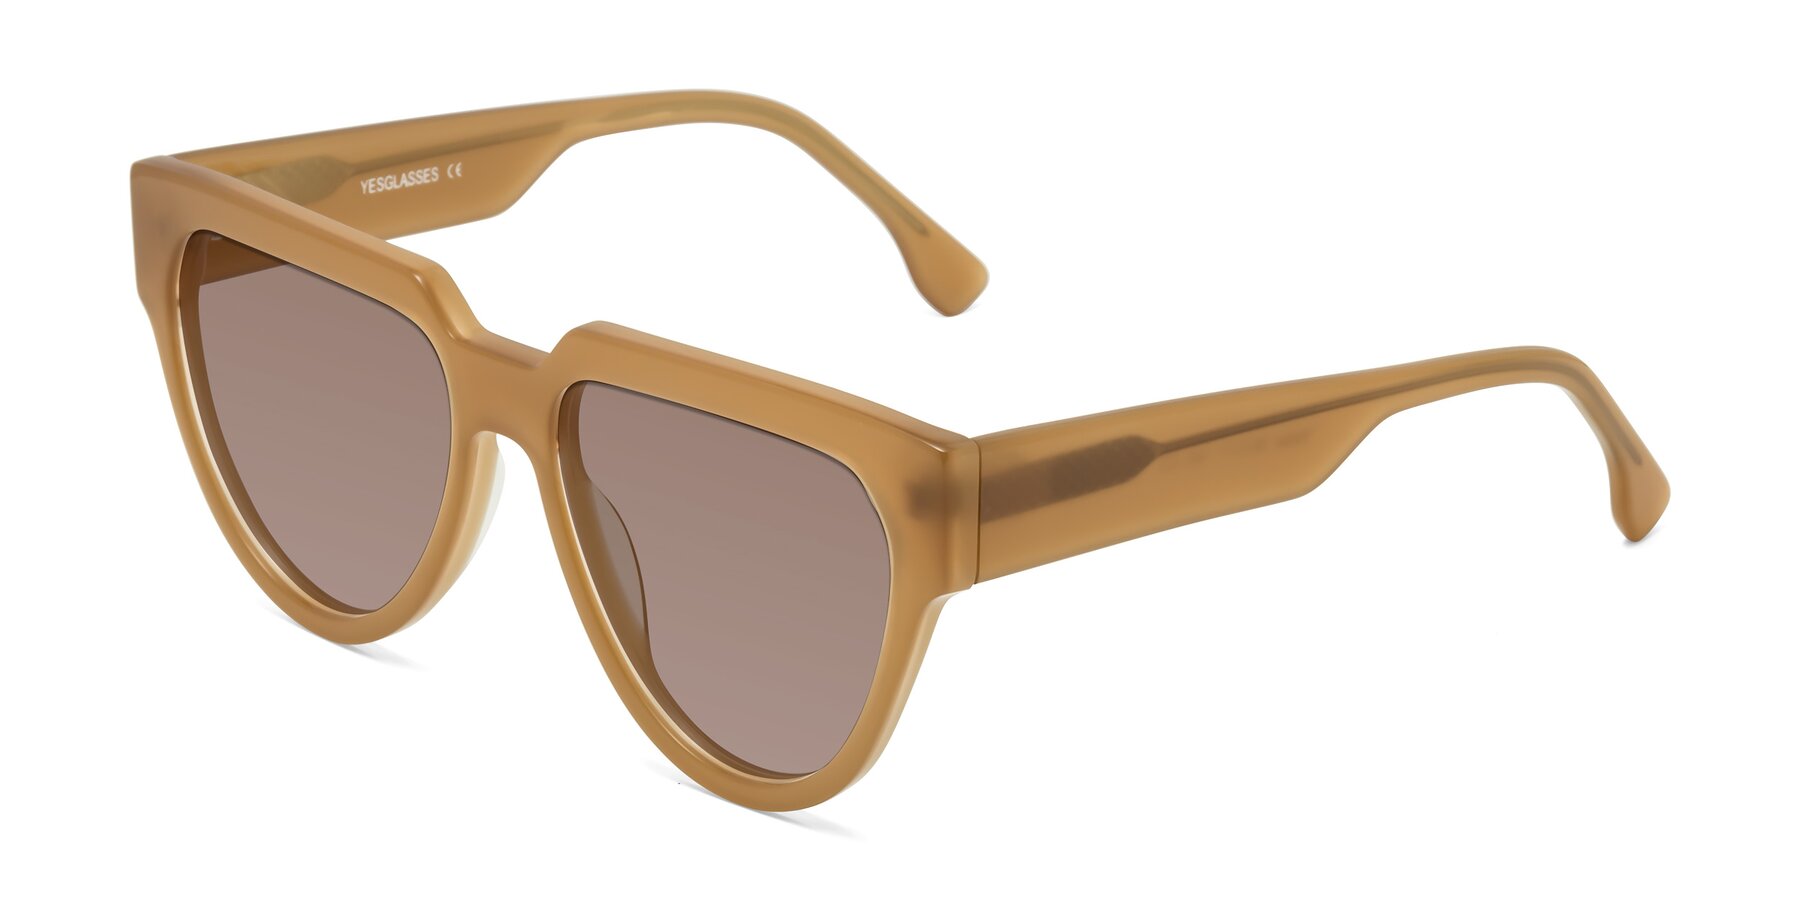 Angle of Yorke in Caramel with Medium Brown Tinted Lenses